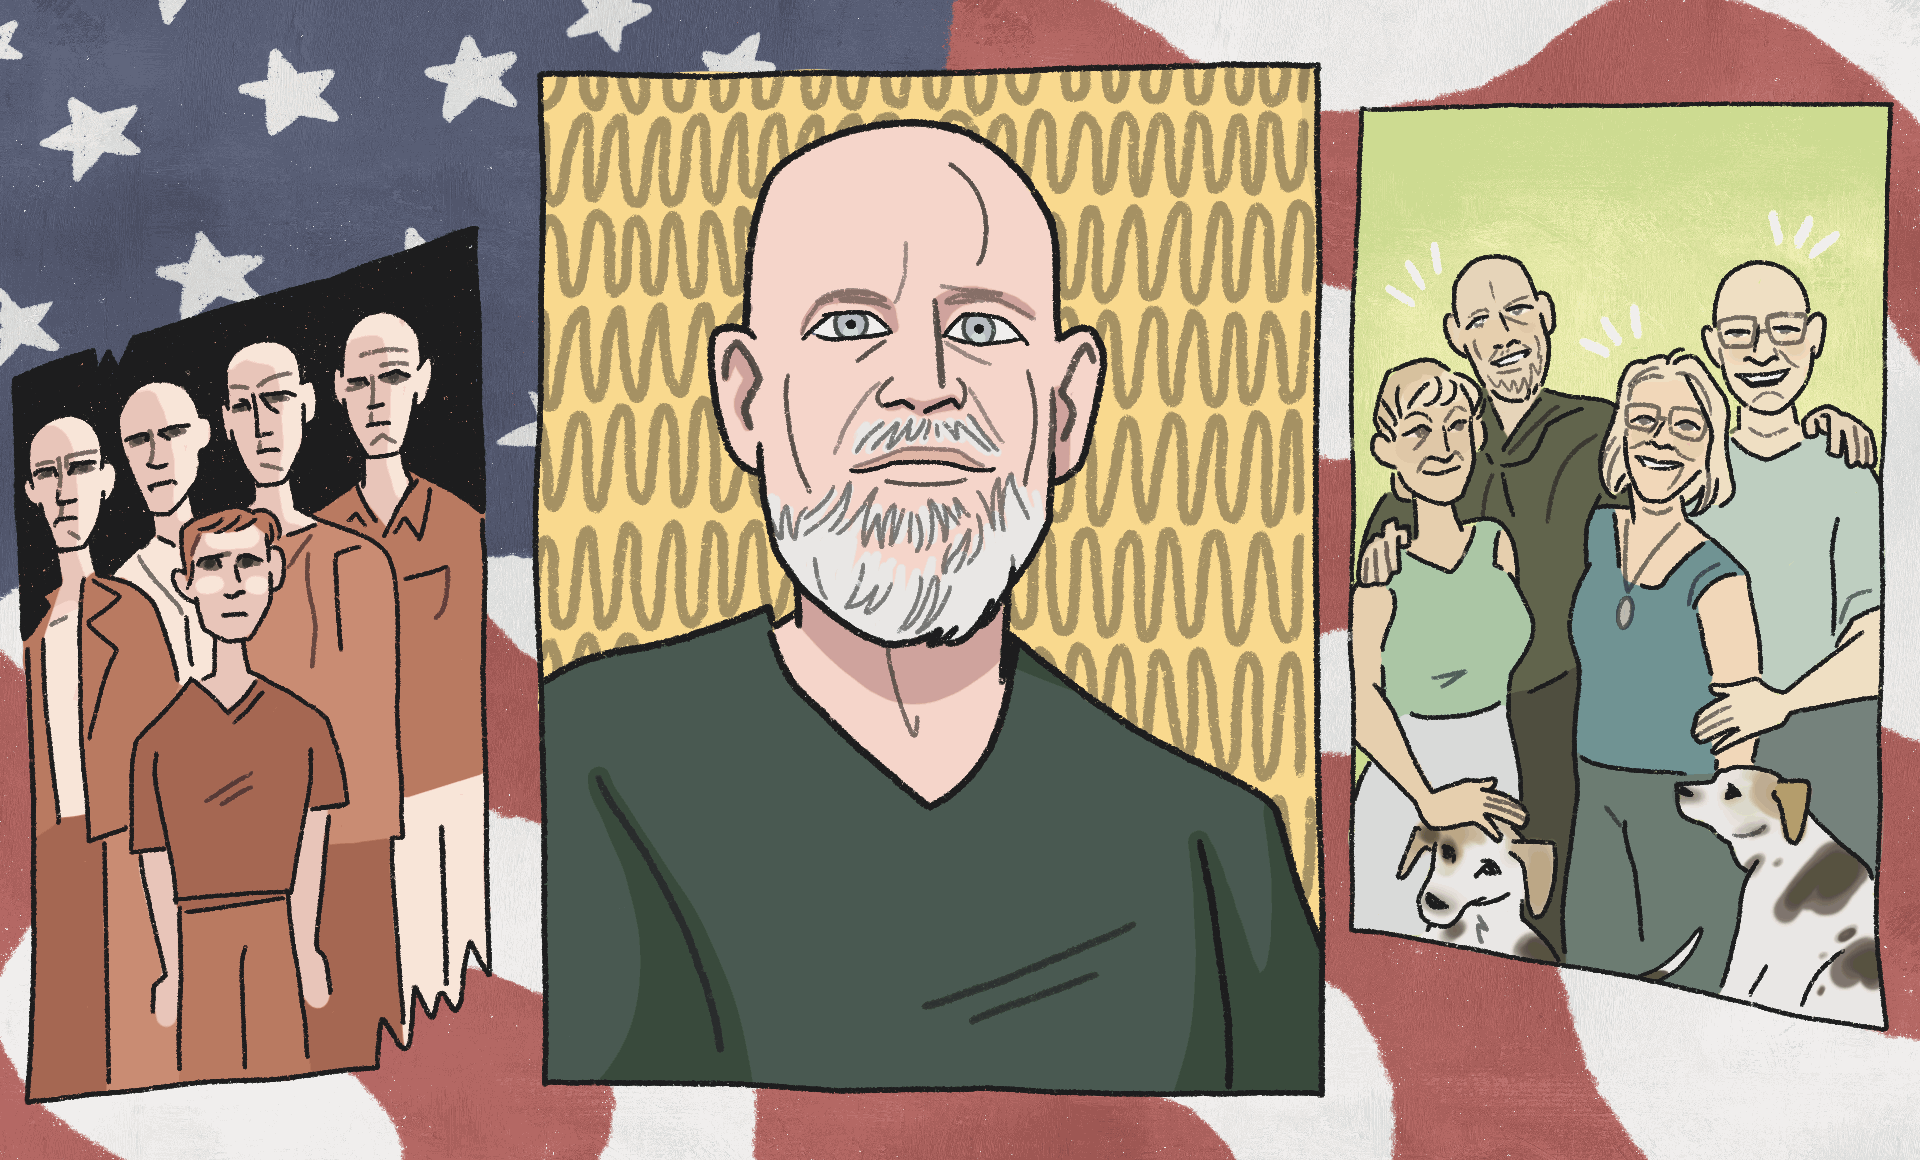 The United States flag waves in the background. In front is an illustration of a bald, white man in a green T-shirt. To his right is a photograph of four middle-aged people and two white dogs with brown spots. To his left is a group of five stern-looking men.